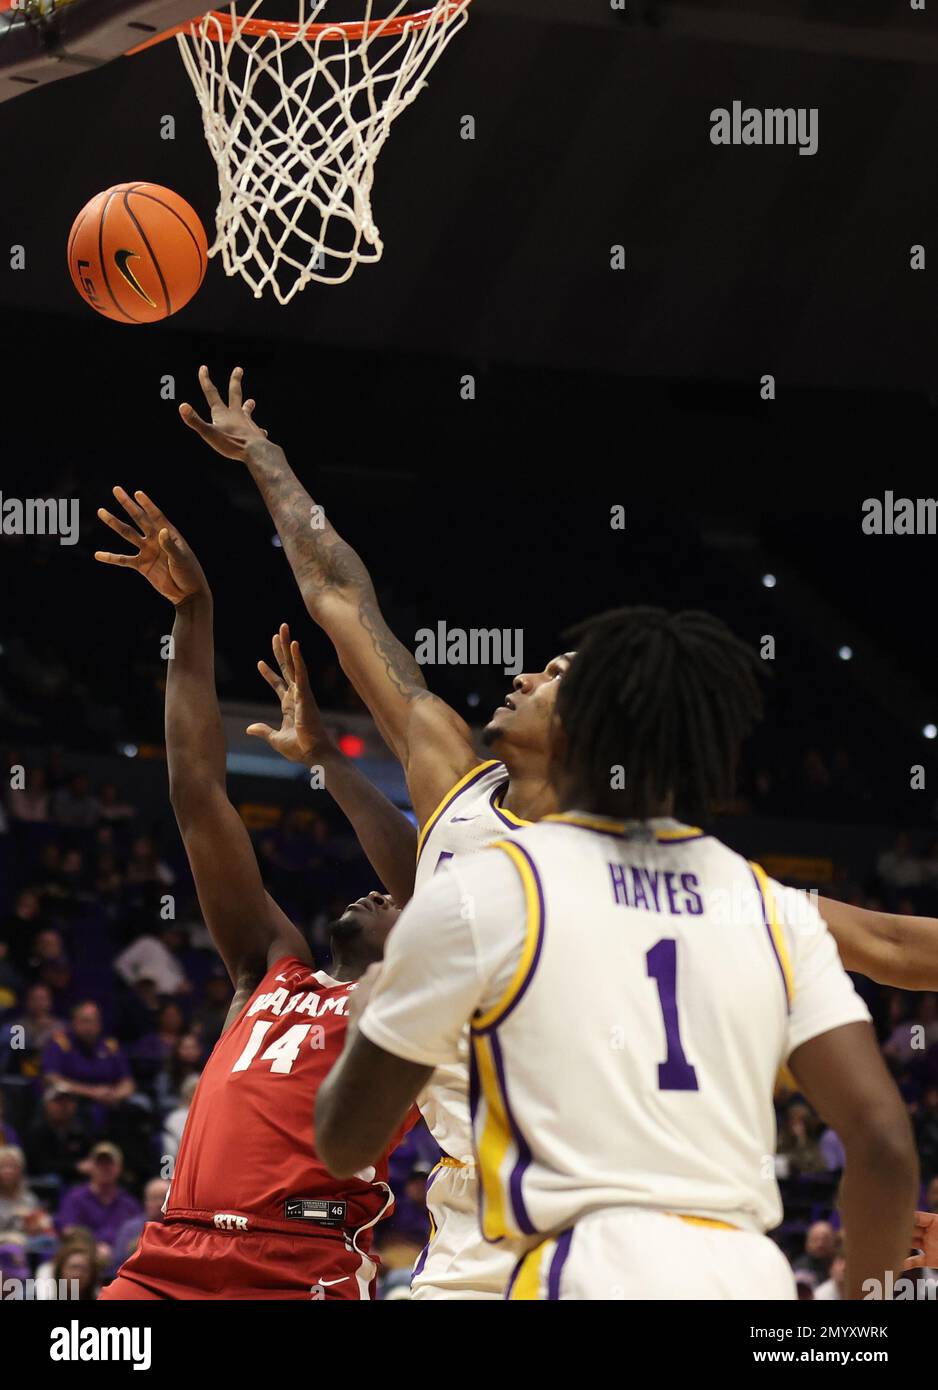 Baton Rouge, USA. 04th Feb, 2023. LSU Tigers forward Shawn Phillips Jr. (34) blocks Alabama Crimson Tide center Charles Bediako (14) shot during a men's college basketball game at the Pete Maravich Assembly Center in Baton Rouge, Louisiana on Saturday, February 4, 2023. (Photo by Peter G. Forest/Sipa USA) Credit: Sipa USA/Alamy Live News Stock Photo